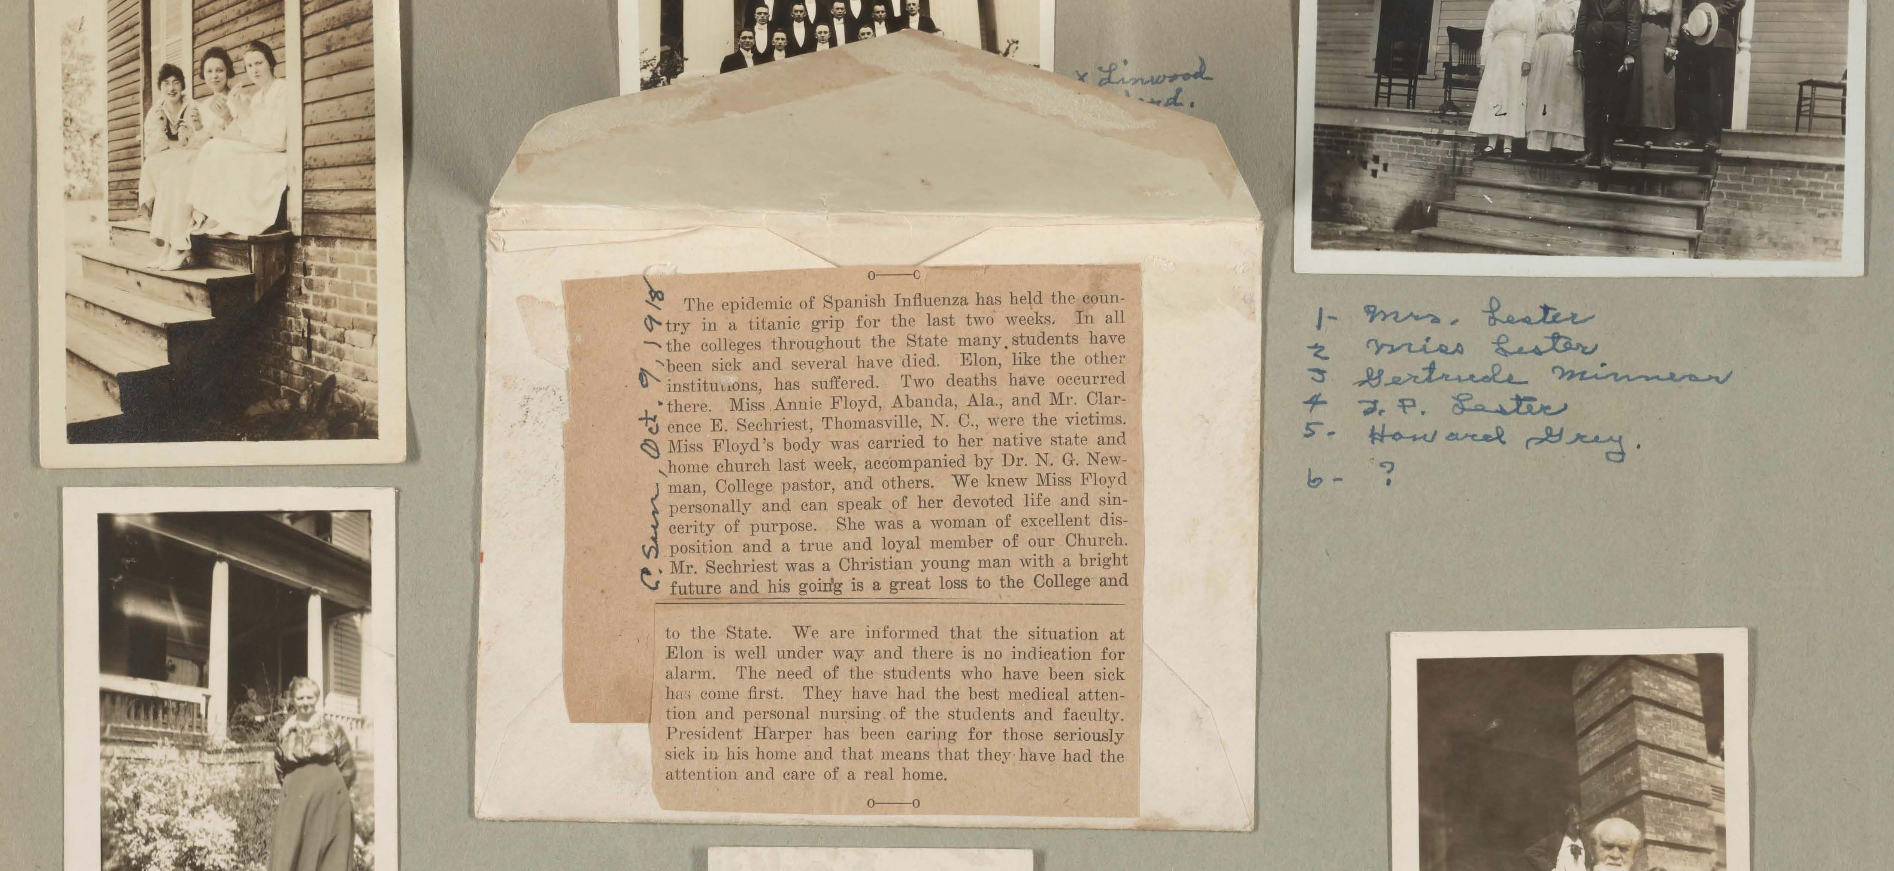 A section of Annie Gordon Floyd's scrapbook. She was a student at Elon College during the 1918 Influenza Pandemic and created a page in her scrapbook using a clipping from a newspaper describing influenza related deaths of classmates.